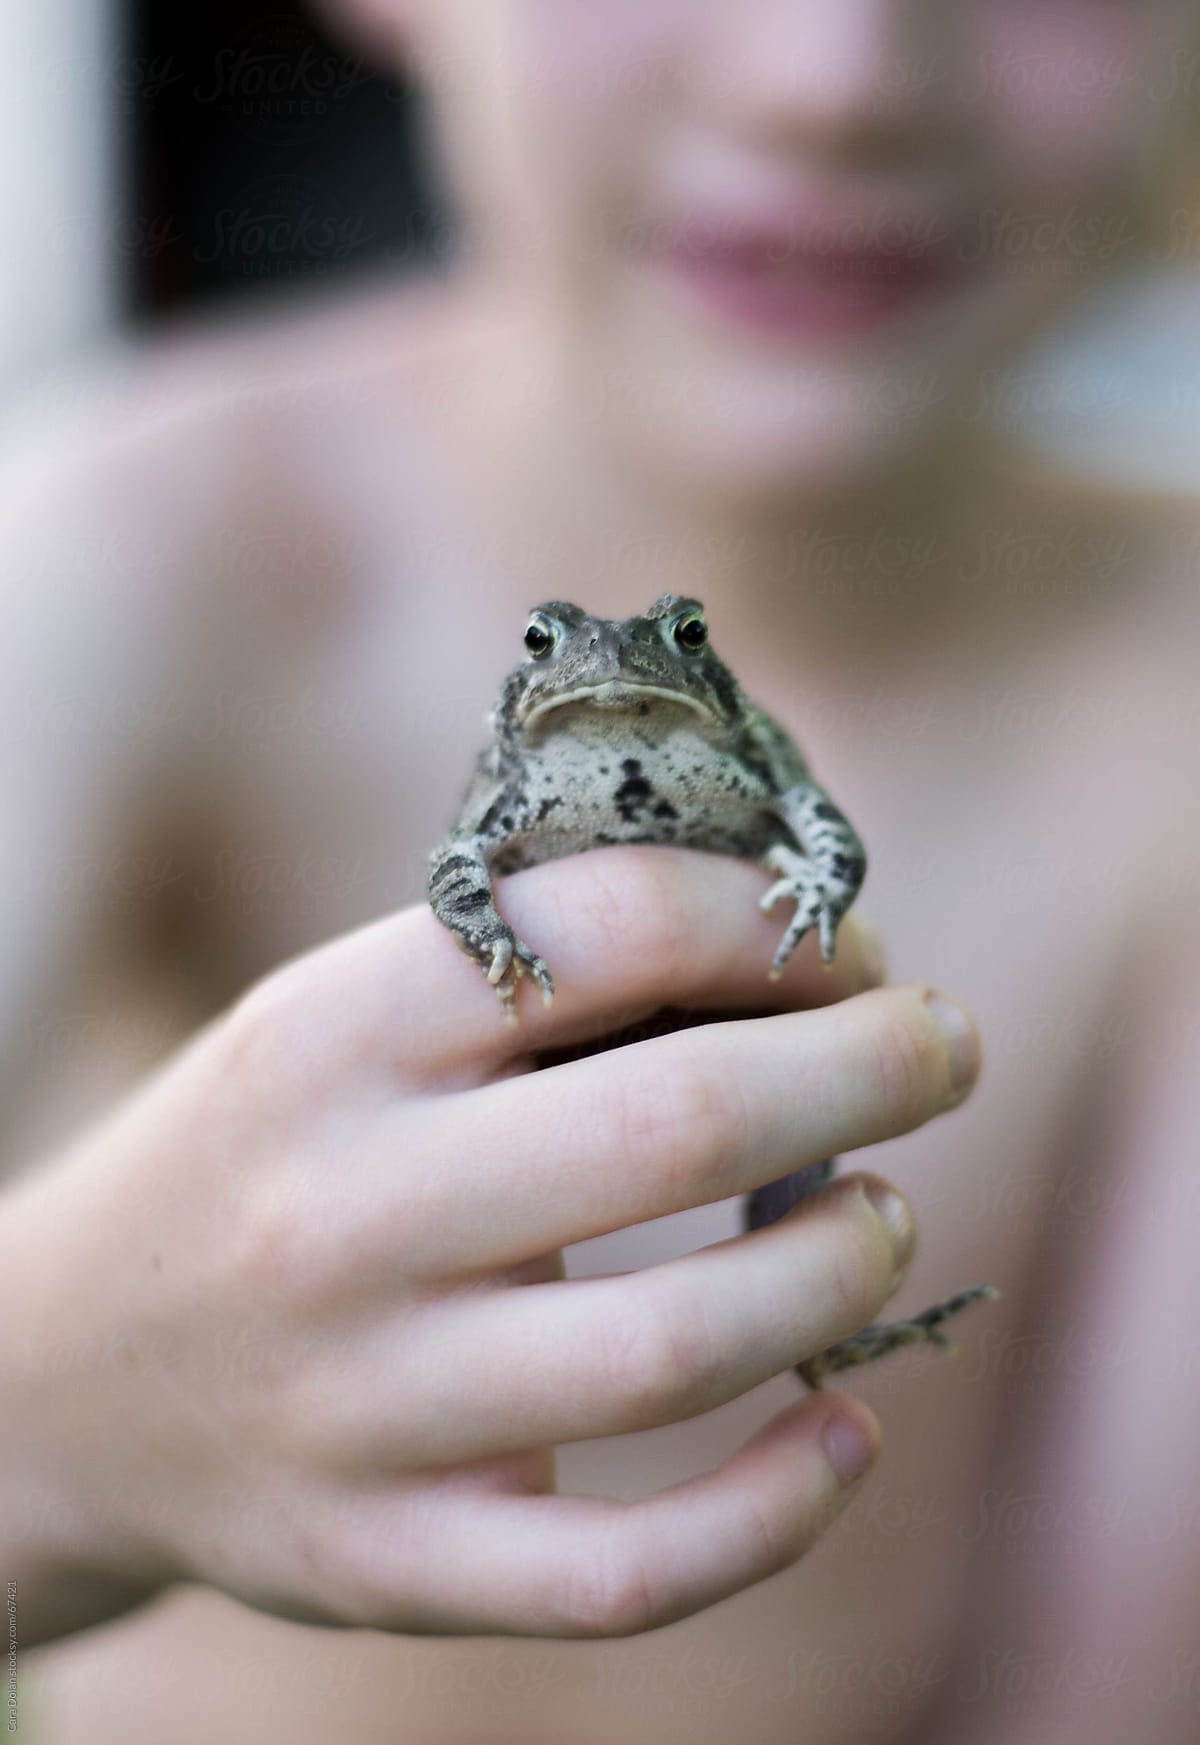 Child holds a toad he caught in his backyard